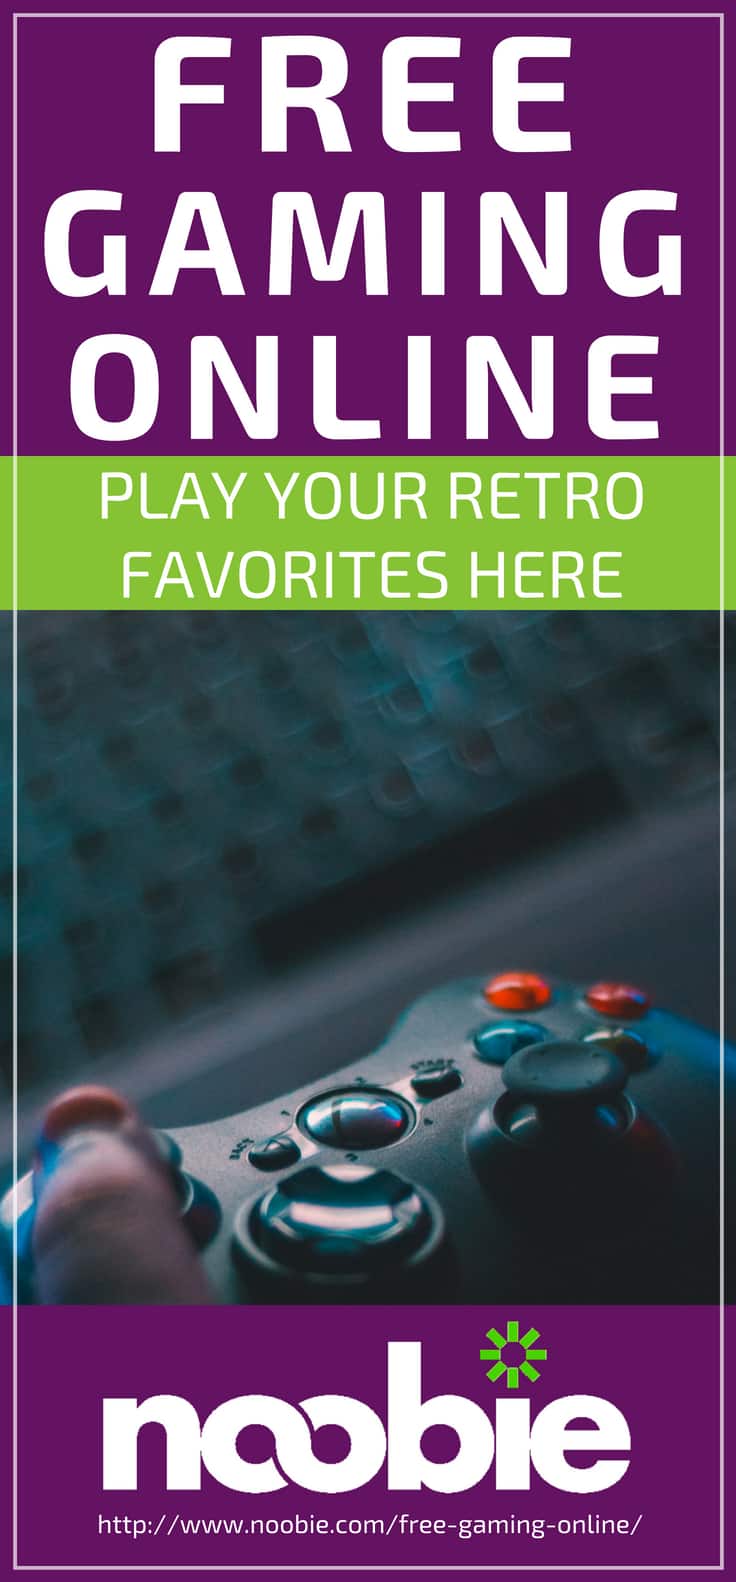 Free Gaming Online | Play Your Retro Favorites Here